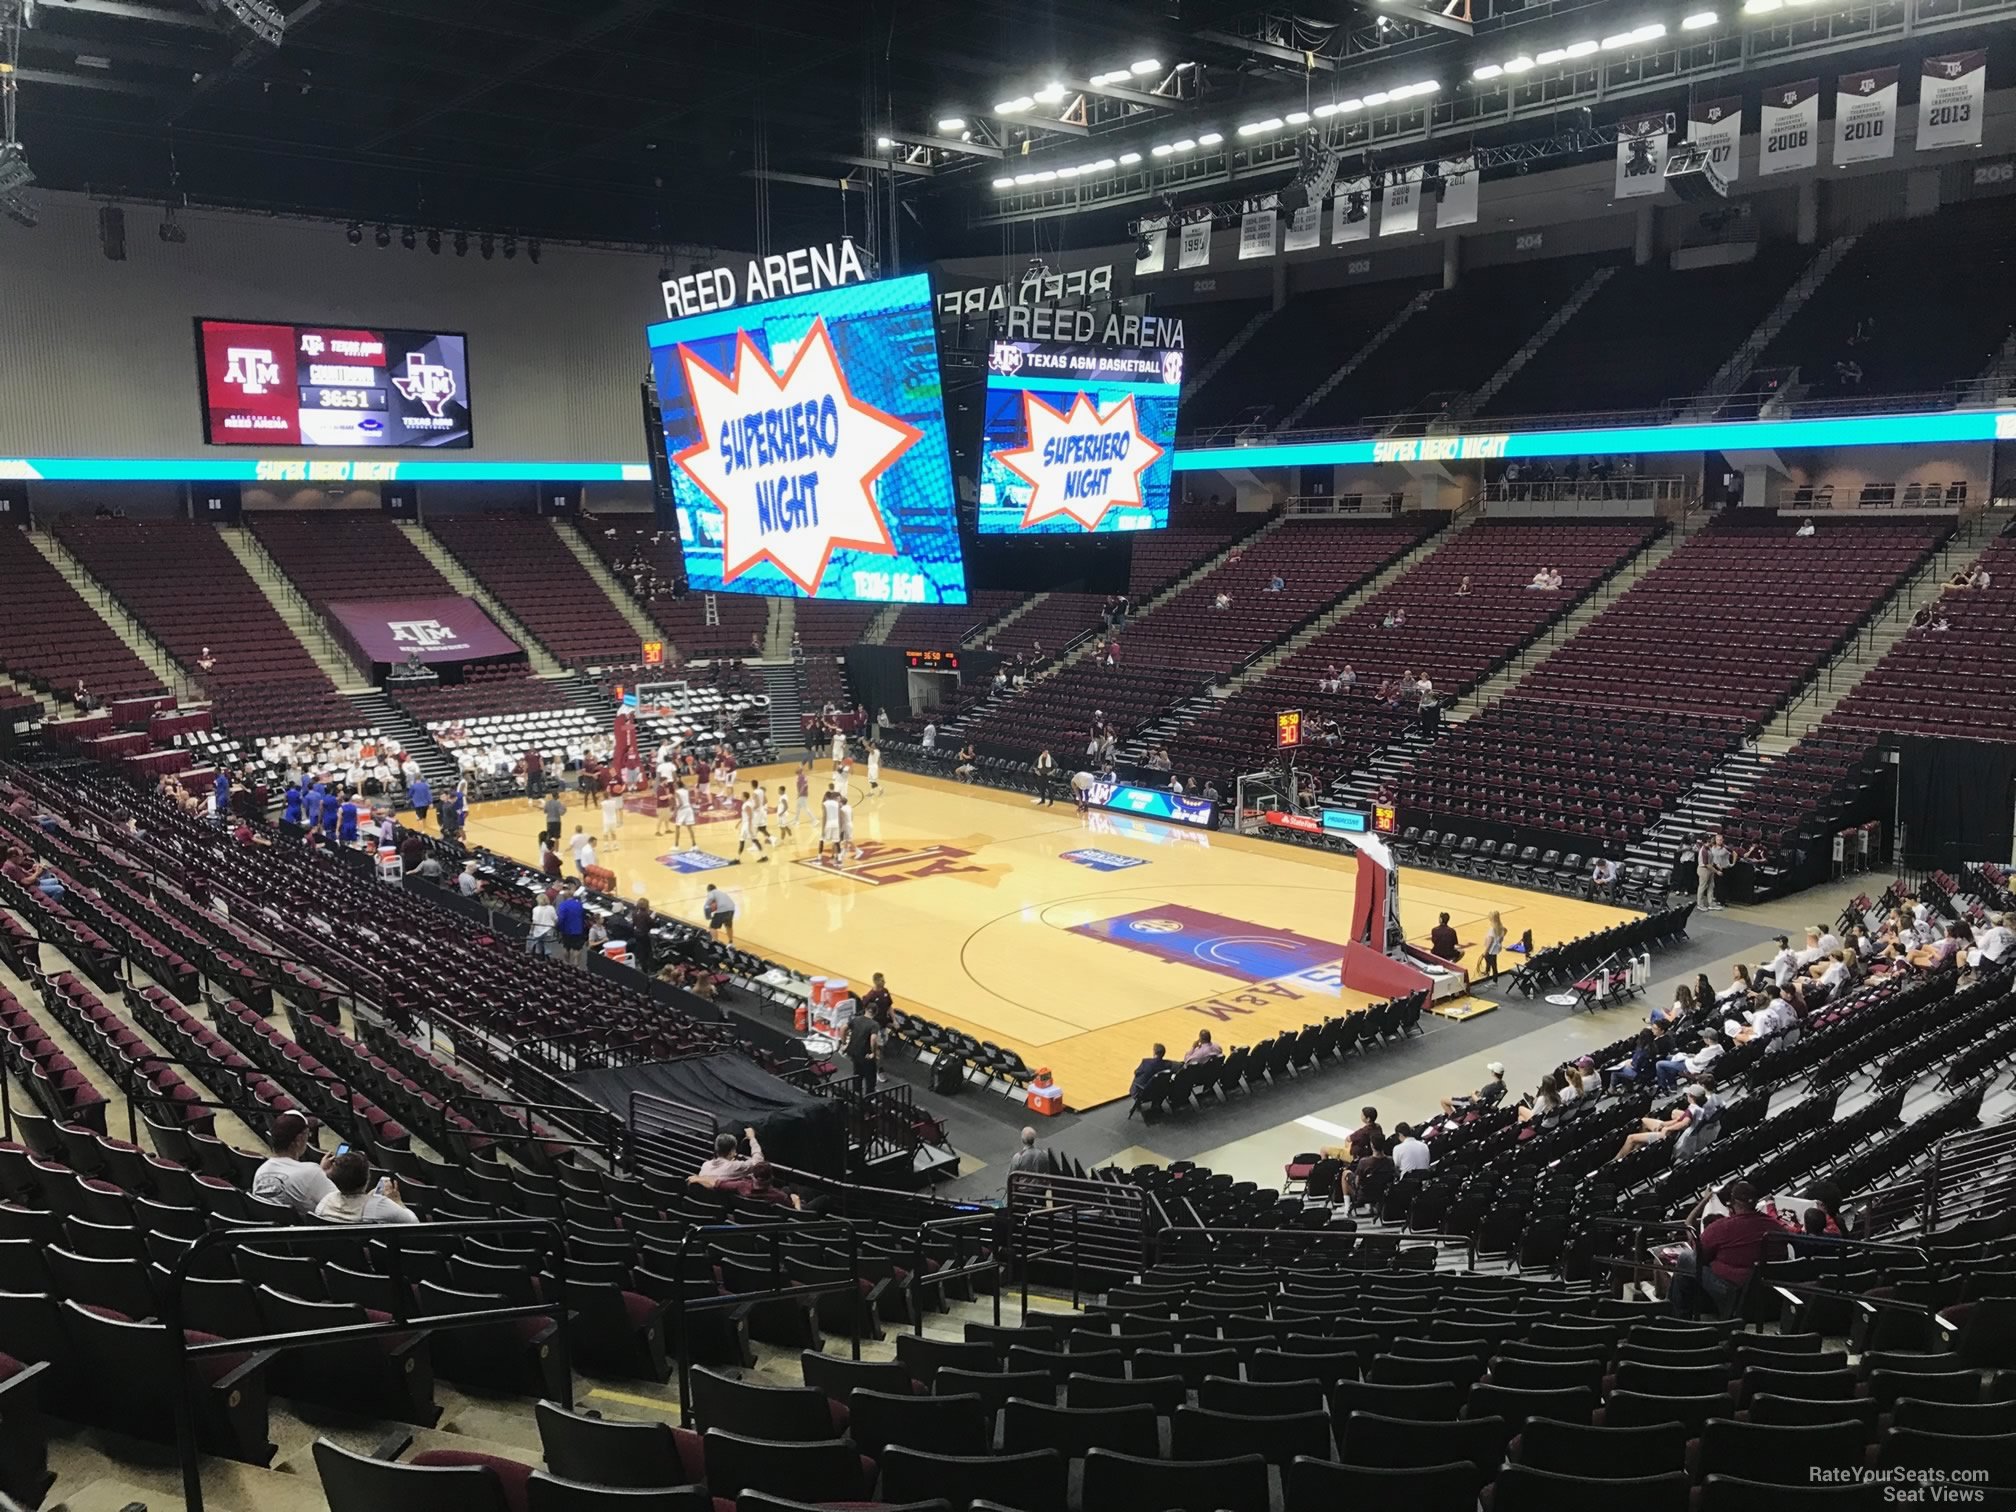 section 117, row s seat view  - reed arena